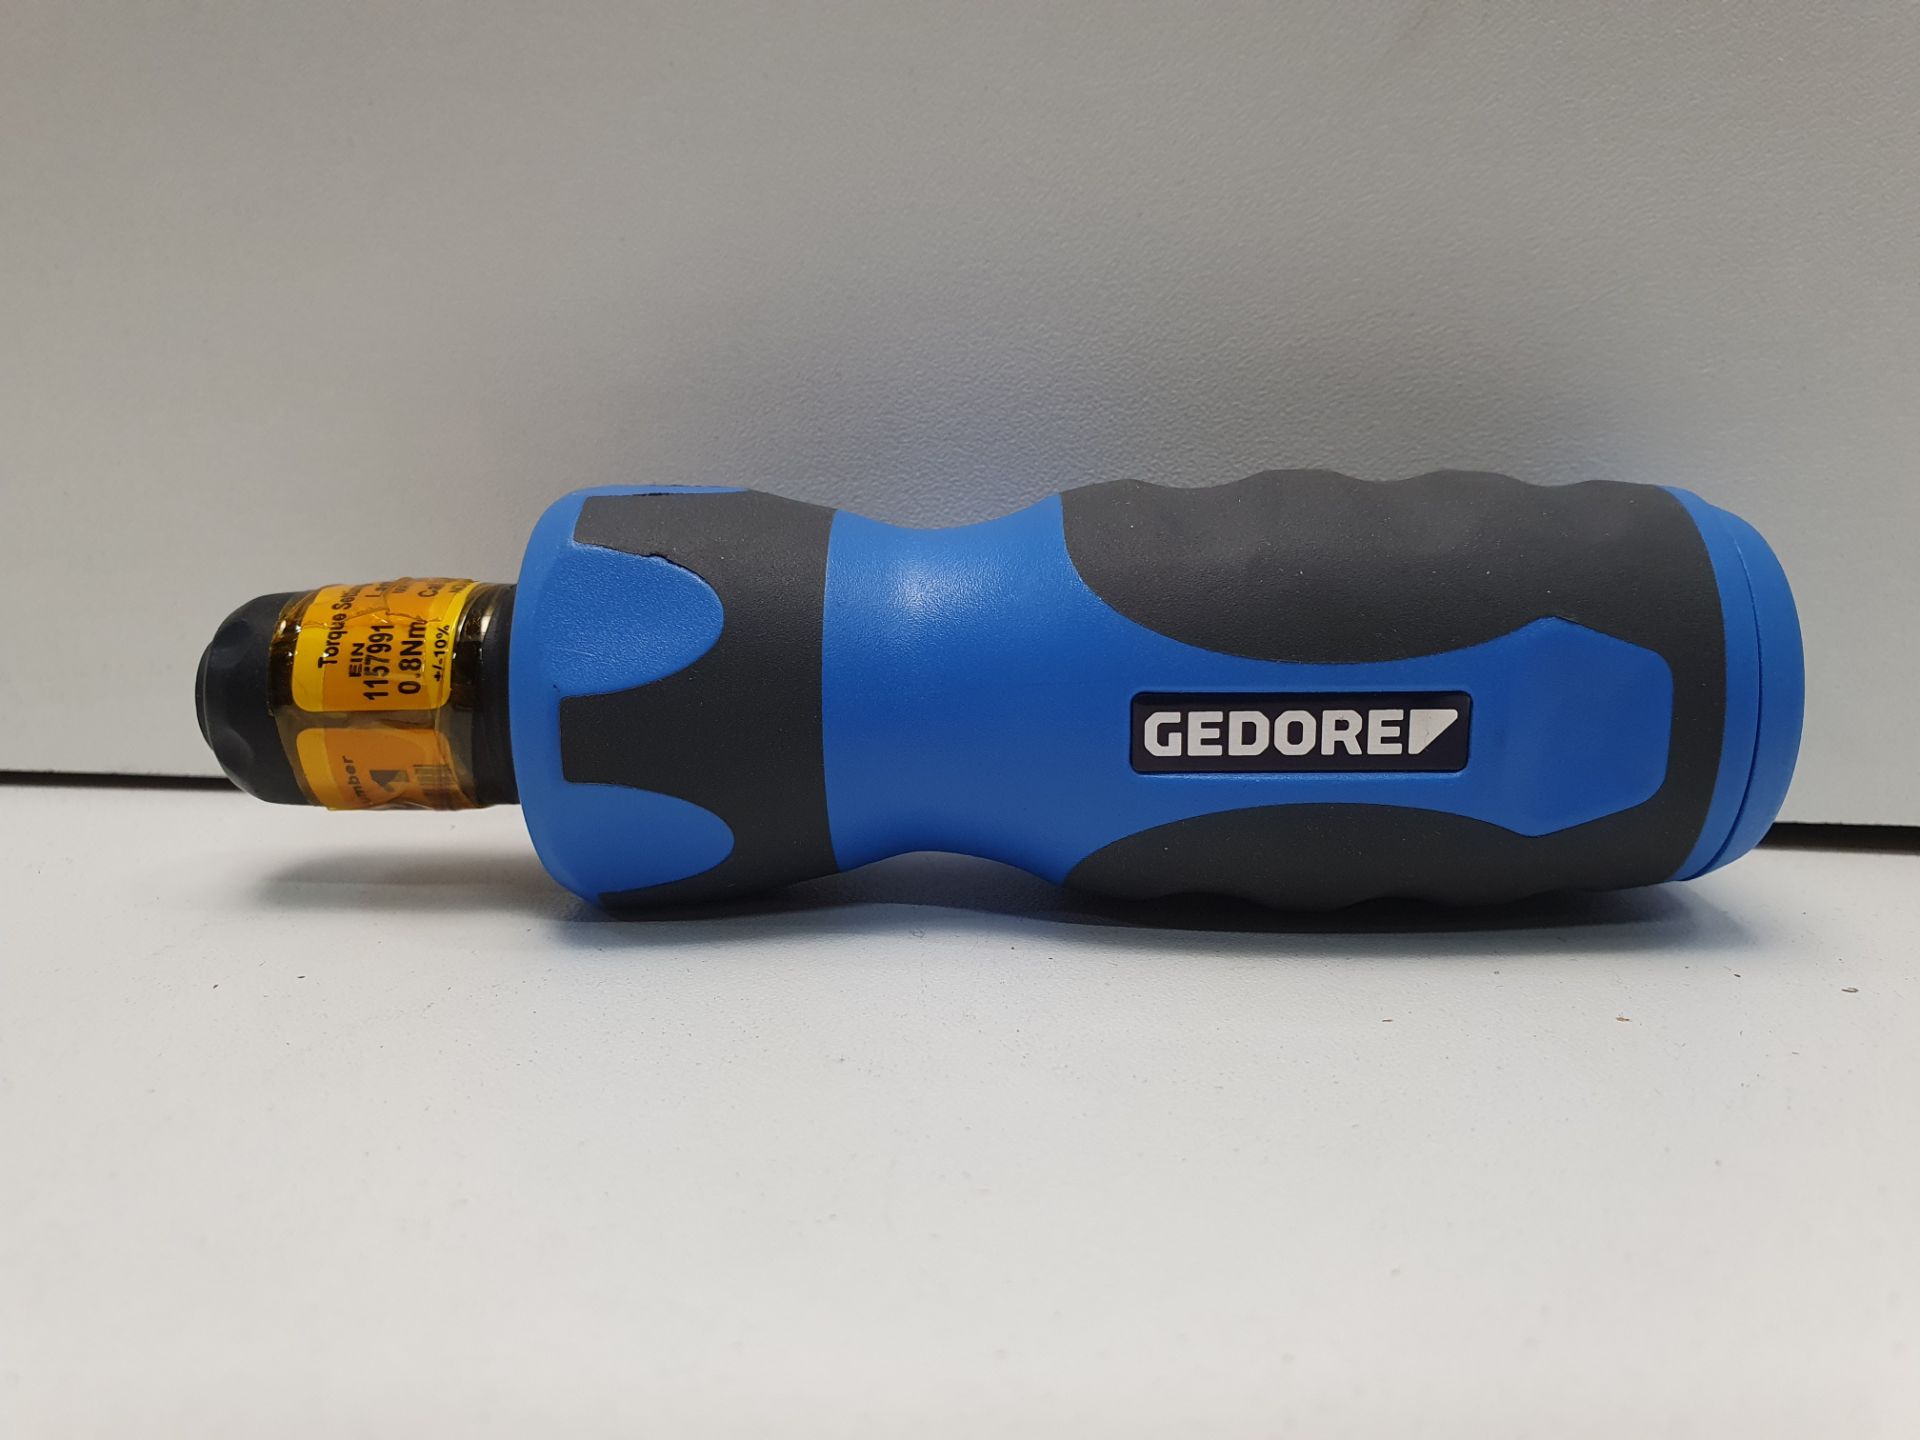 Gedore 1/4 in Hex Pre-Settable Torque Screwdriver, 2.5 ? 13.5Nm without Bar